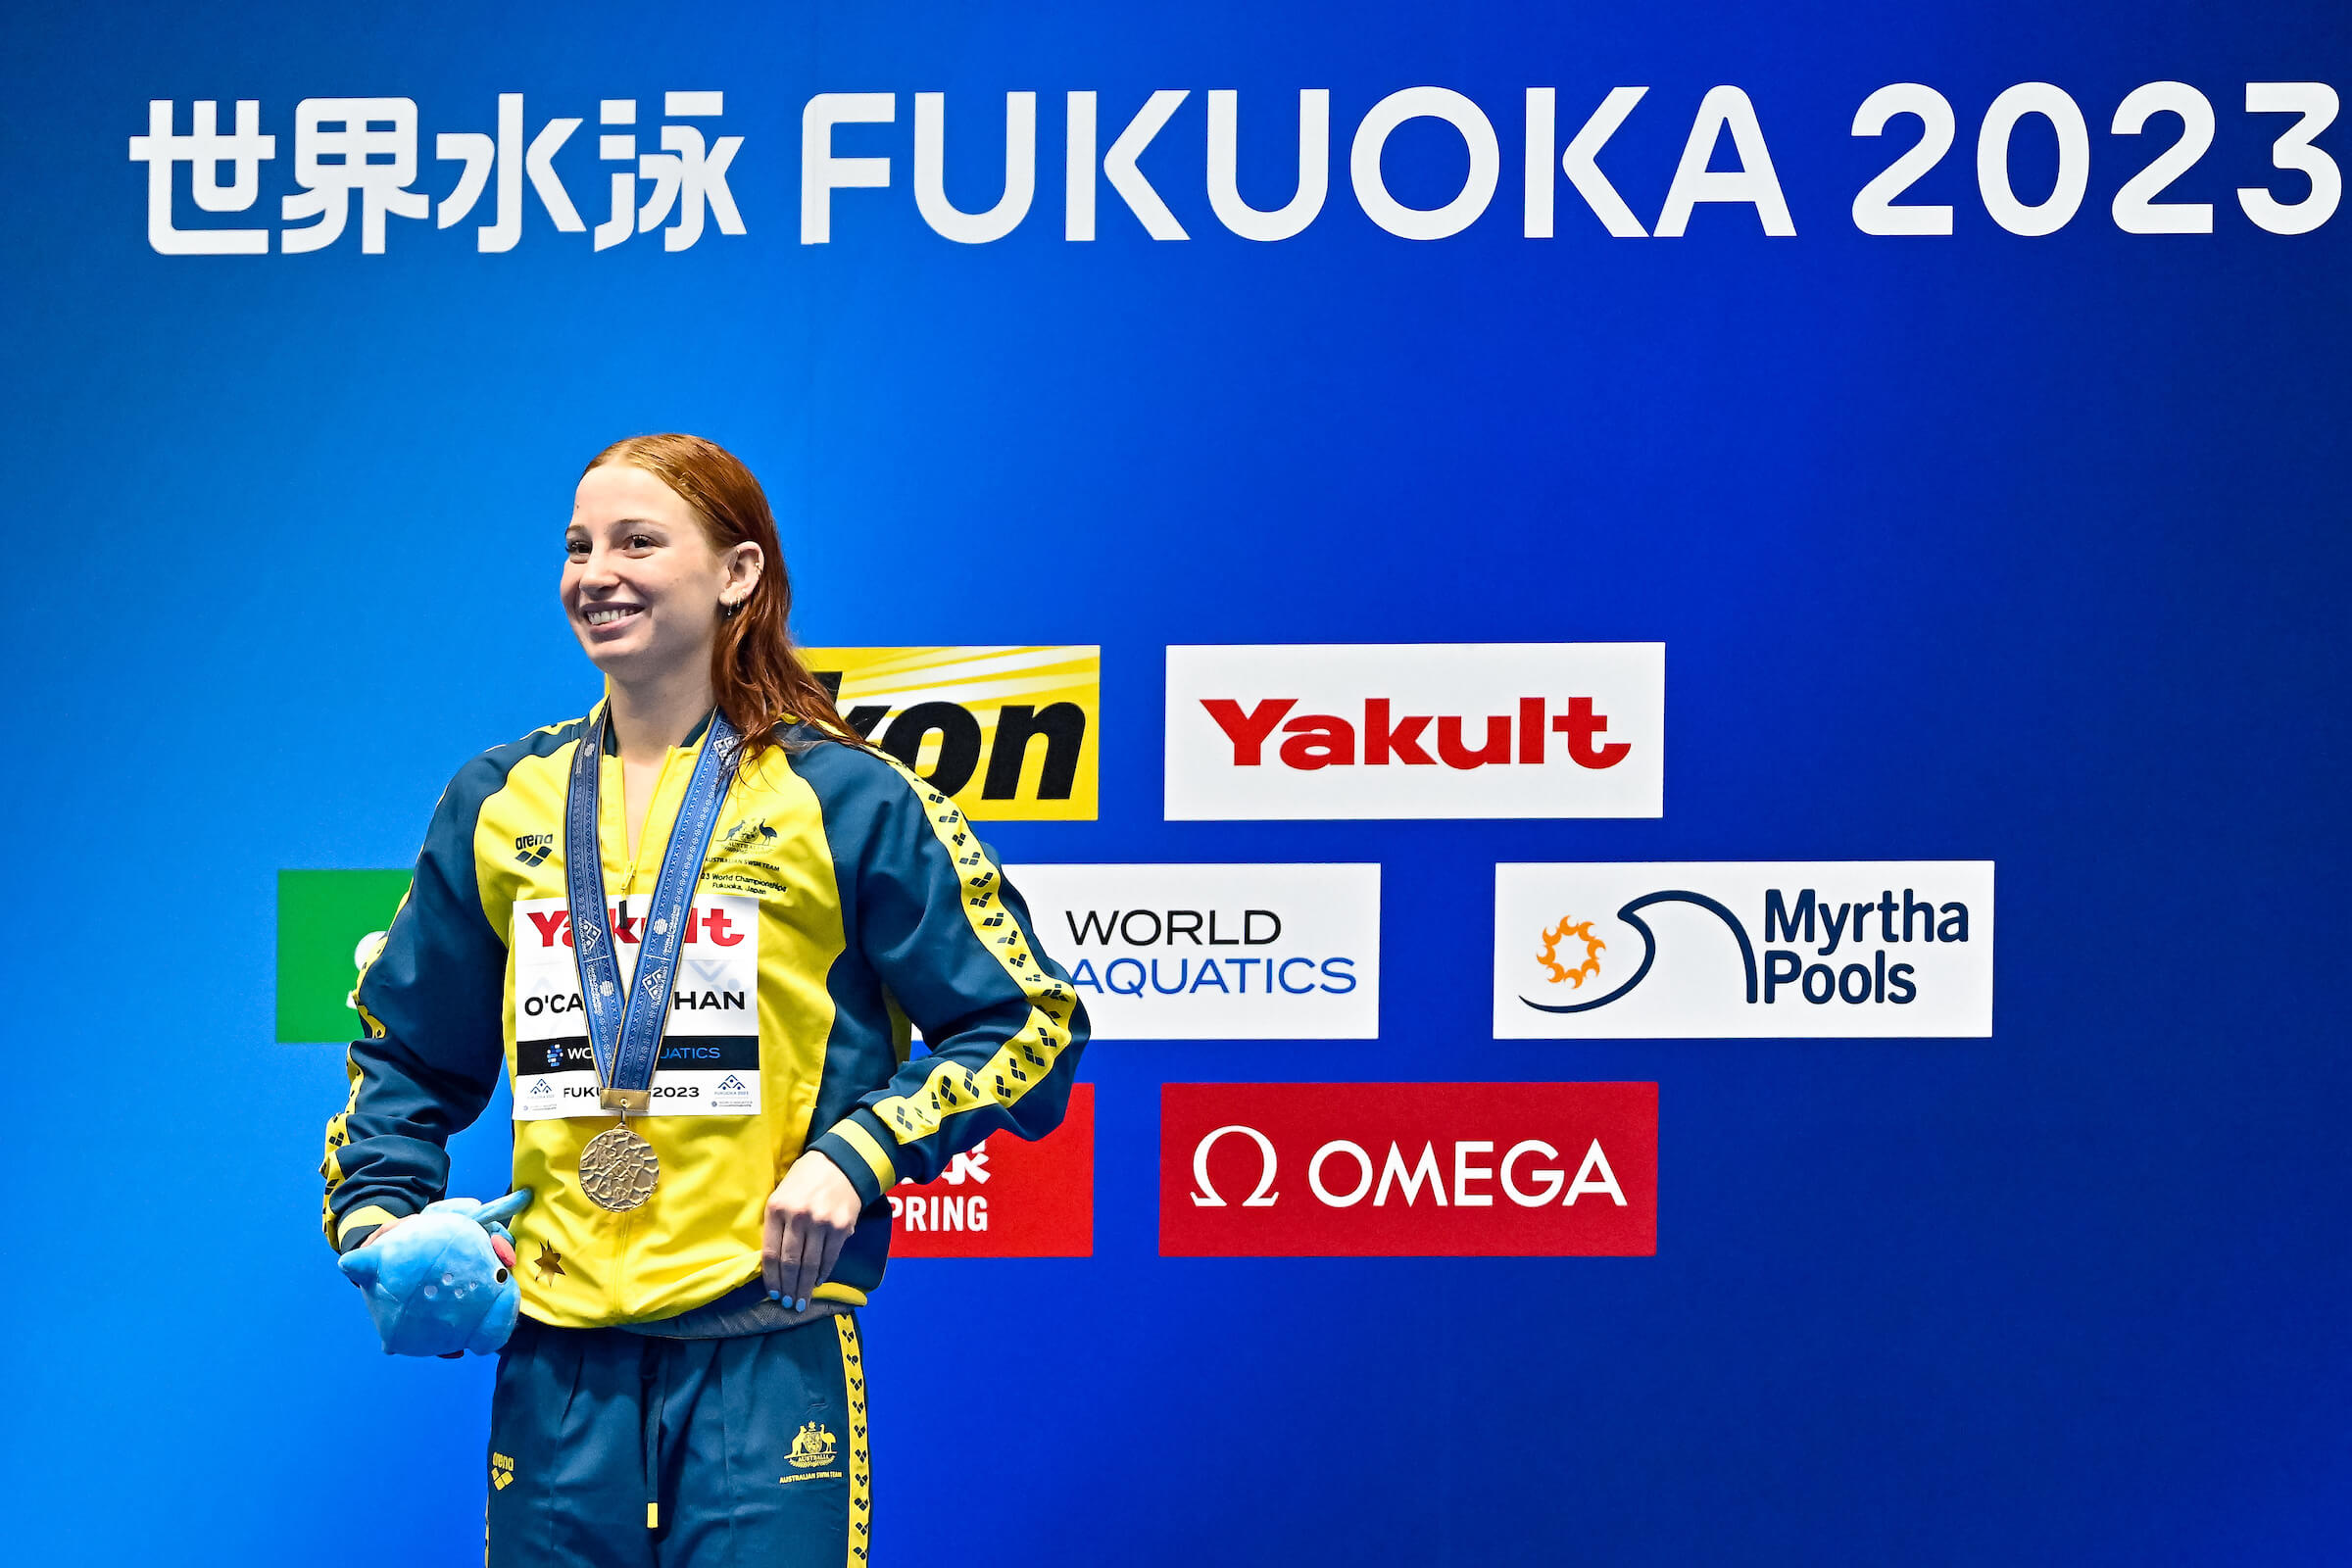 Mollie O'callaghan of Australia stands with the gold medal after competing in the 100m Freestyle Women Final during the 20th World Aquatics Championships at the Marine Messe Hall A in Fukuoka (Japan), July 28th, 2023.